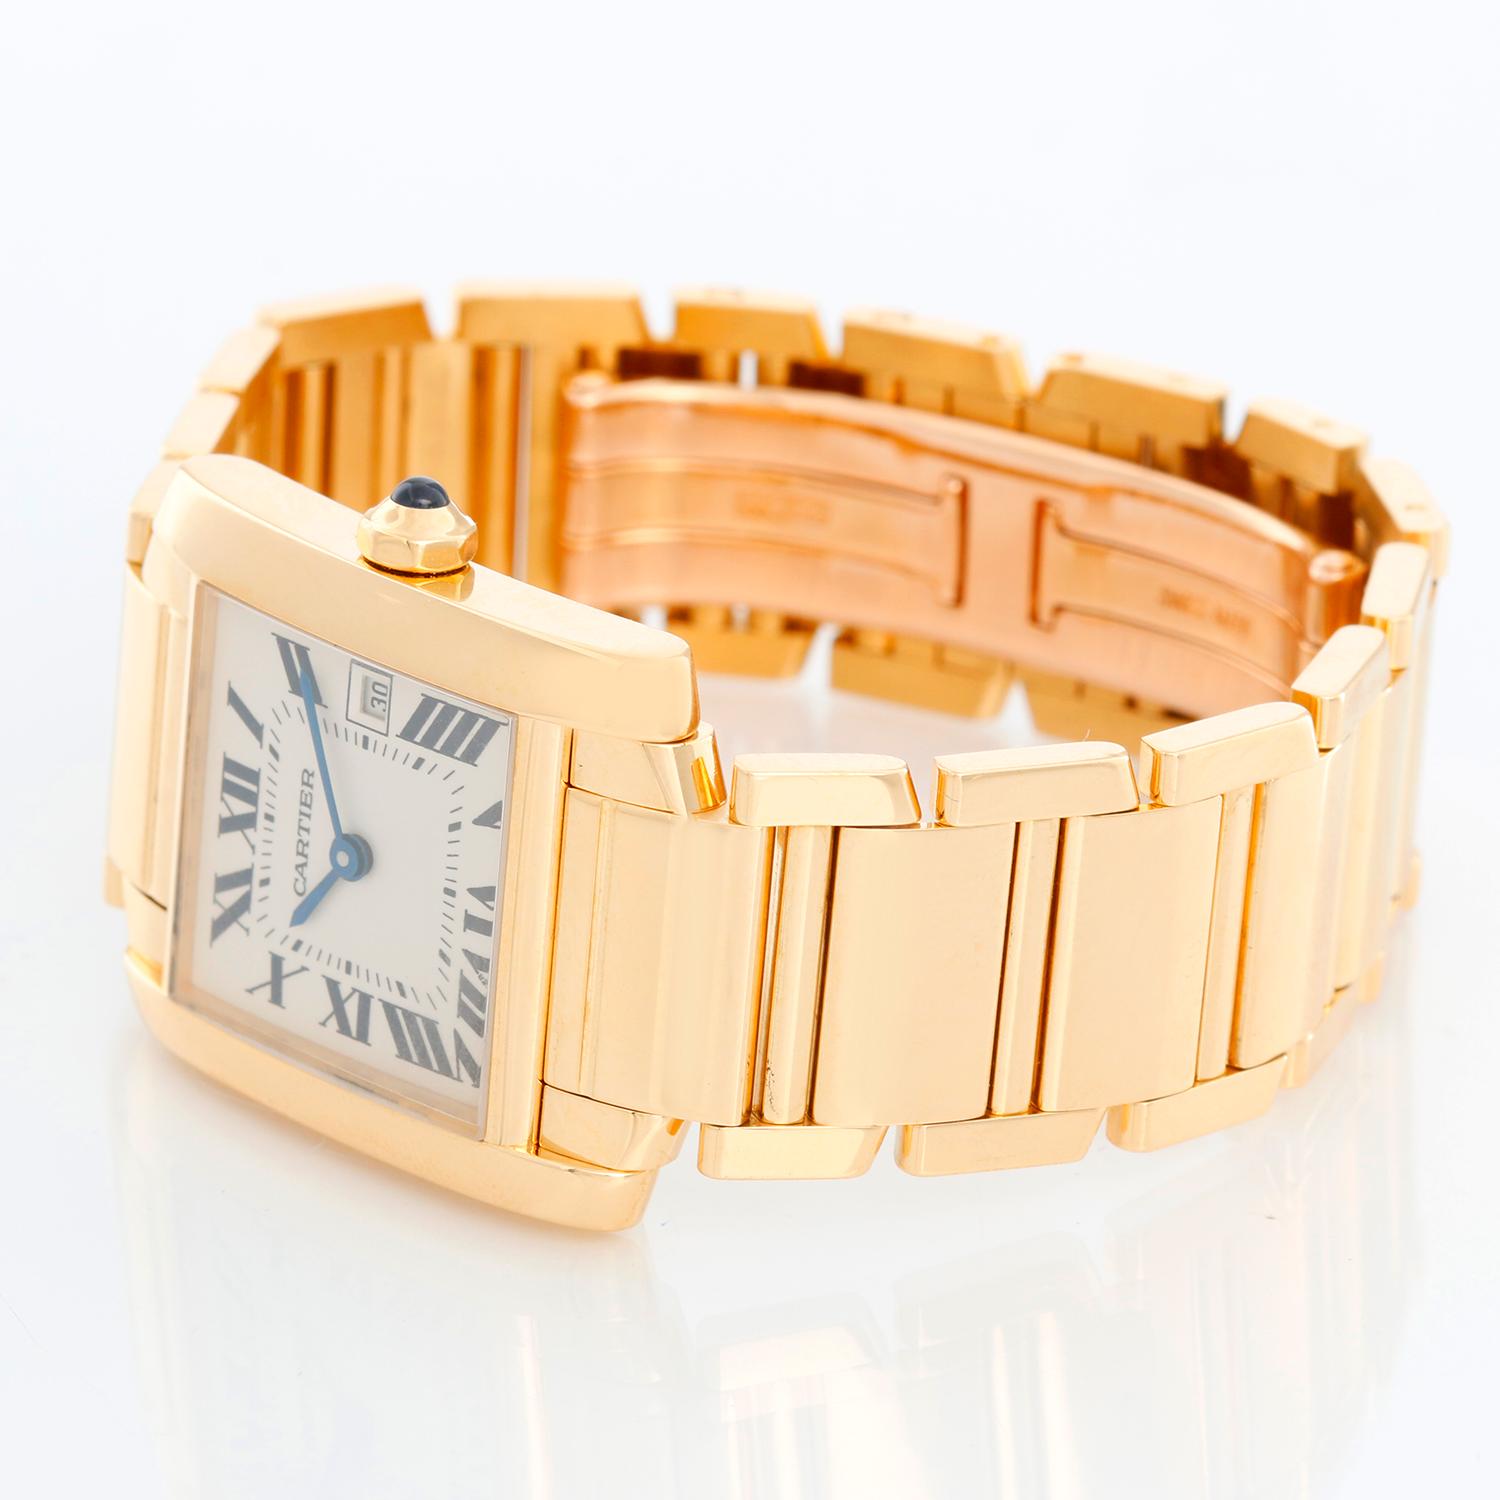 Cartier Tank Francaise Midsize 18k Yellow Gold Men's/Ladies Watch W50014N2 - Quartz. 18k yellow gold  case; blue sapphire cabochon crown (25mm x 30mm).  Ivory colored dial with black Roman numerals; date at 3 o'clock. Cartier 18k yellow gold